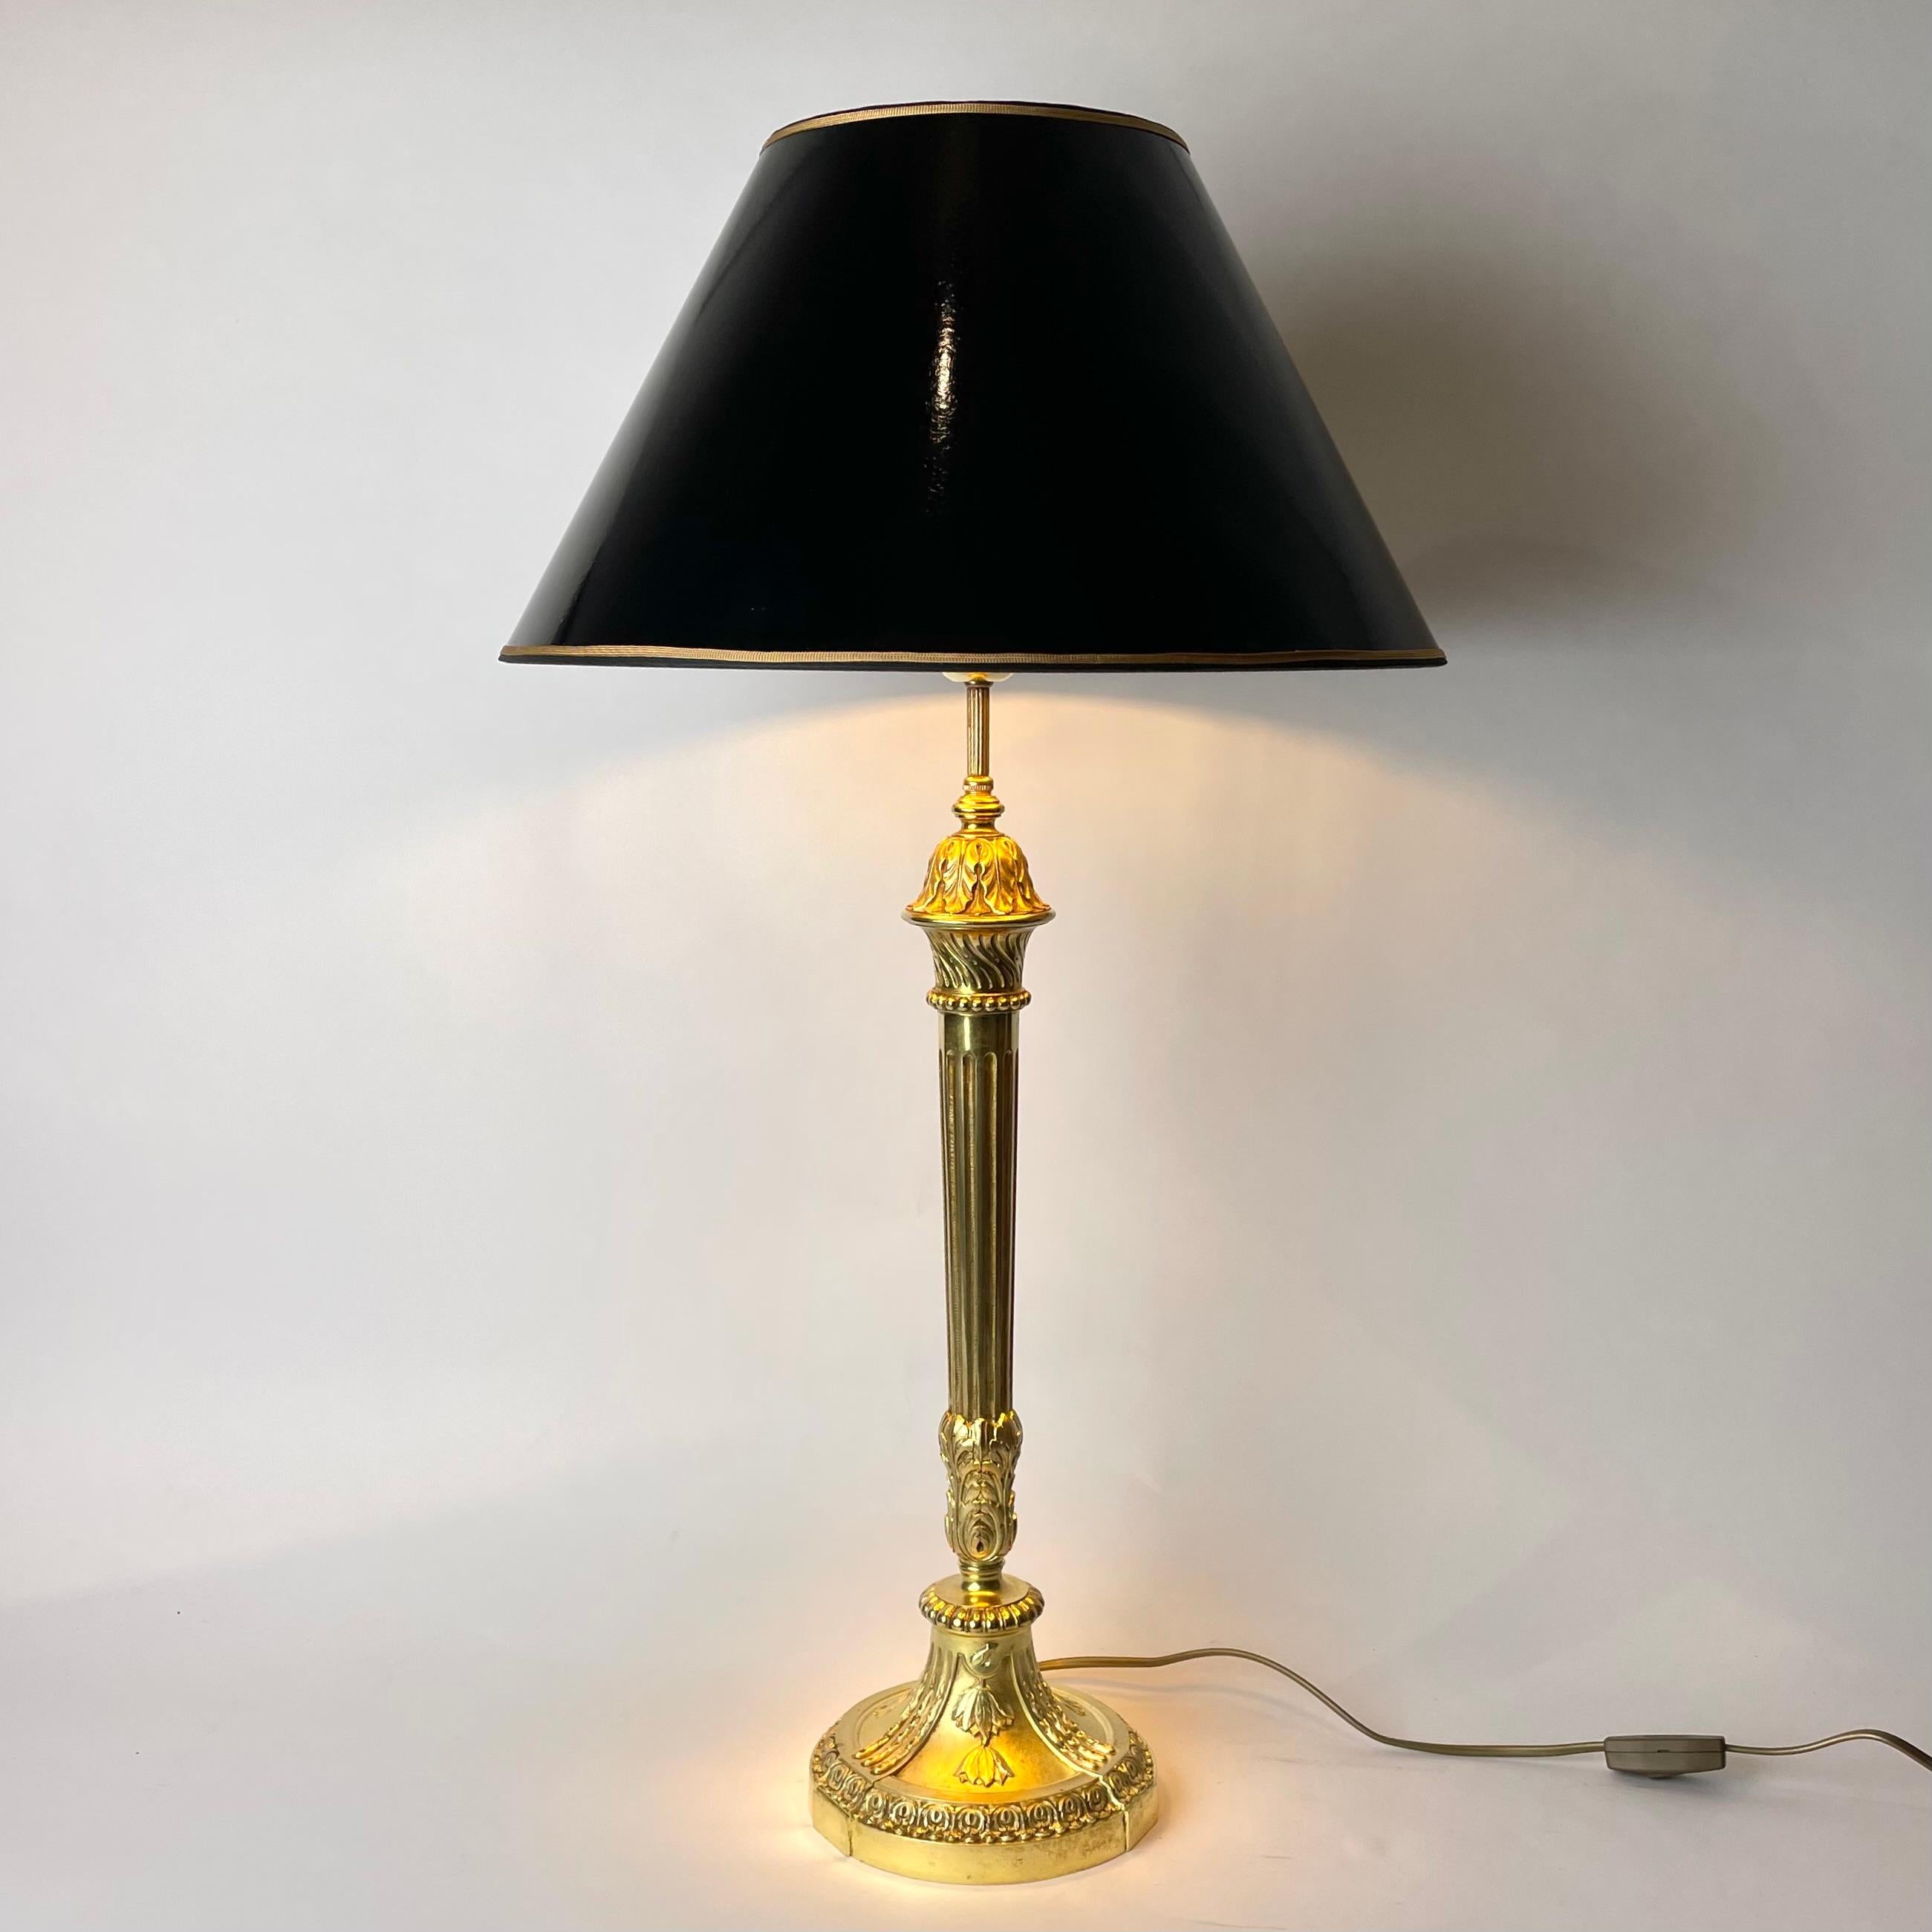 Large & elegant Table Lamp in gilded bronze. Louis XVI style from the early 20th Century. Richly decorated with period design.

The new lampshade in black lacquer with a gilded inside to give a cozy light.

Newly rewired electricity 

Wear